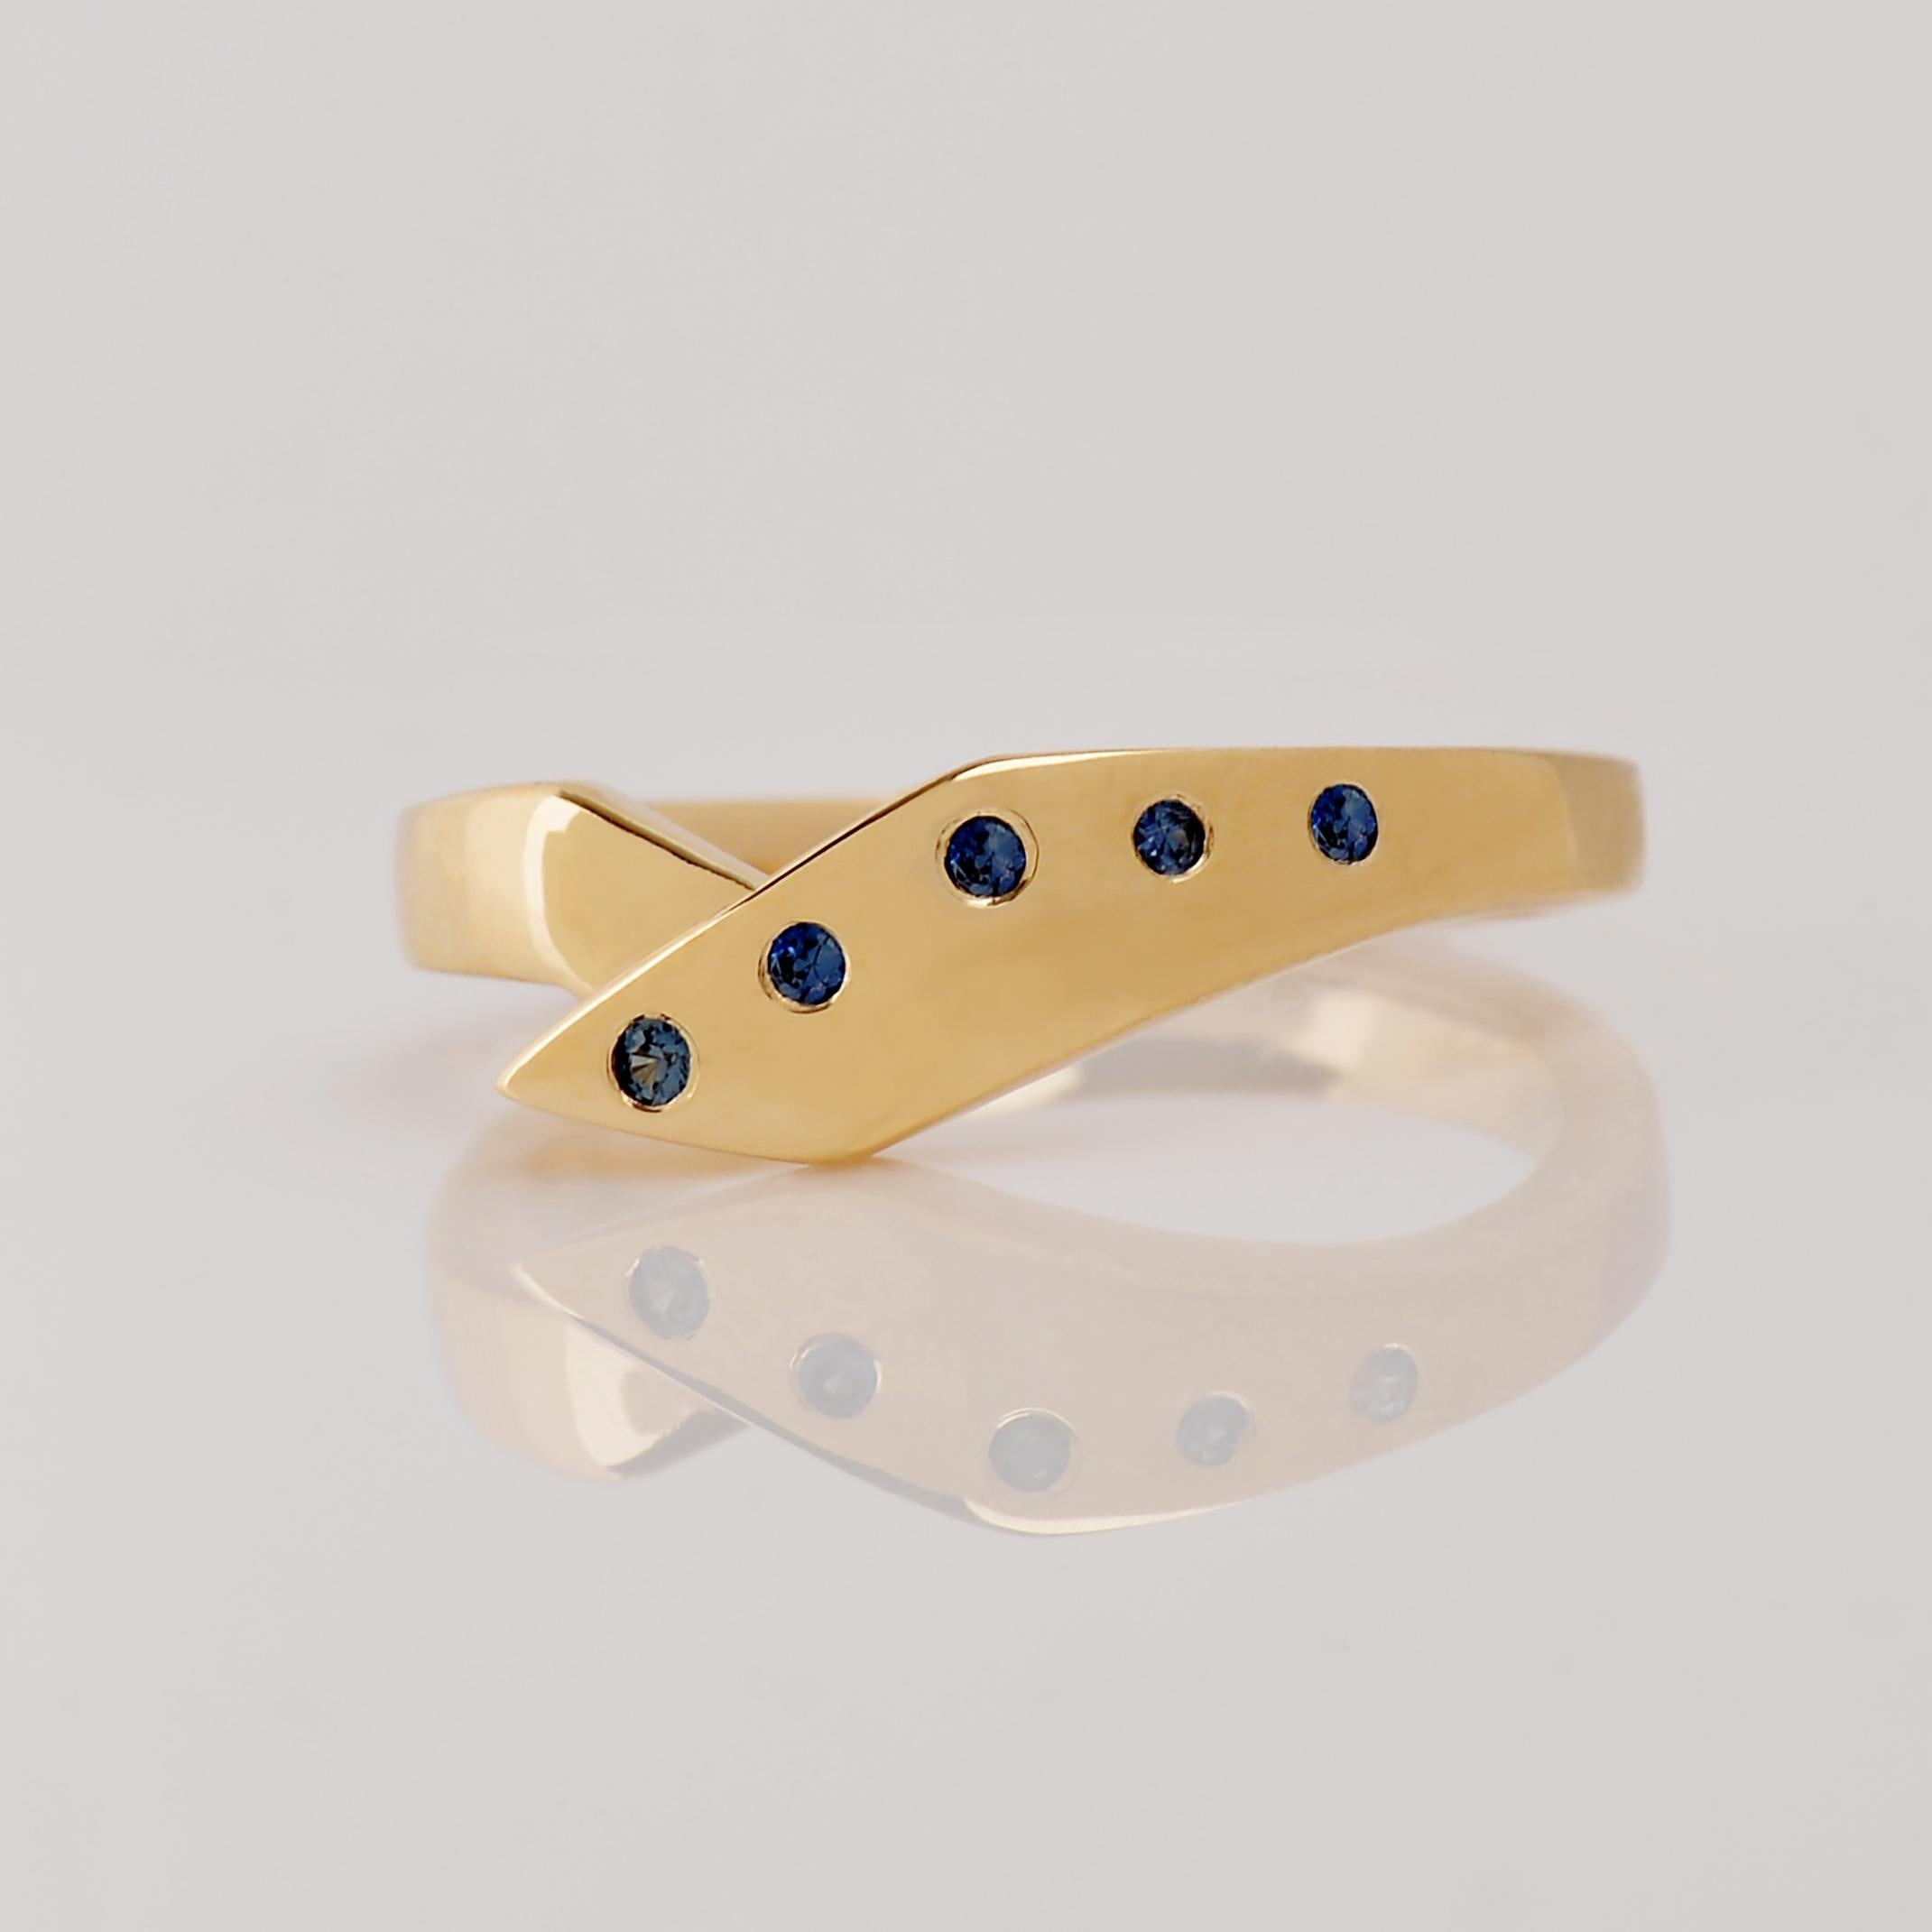 When you look down at the modern Chafee ring, it’s like a little piece of architecture in gold.
Our Chafee ring is named afterJudith Chafee, a Tucson based architect that embraced “regionalism” in architecture, an approach that responds to local